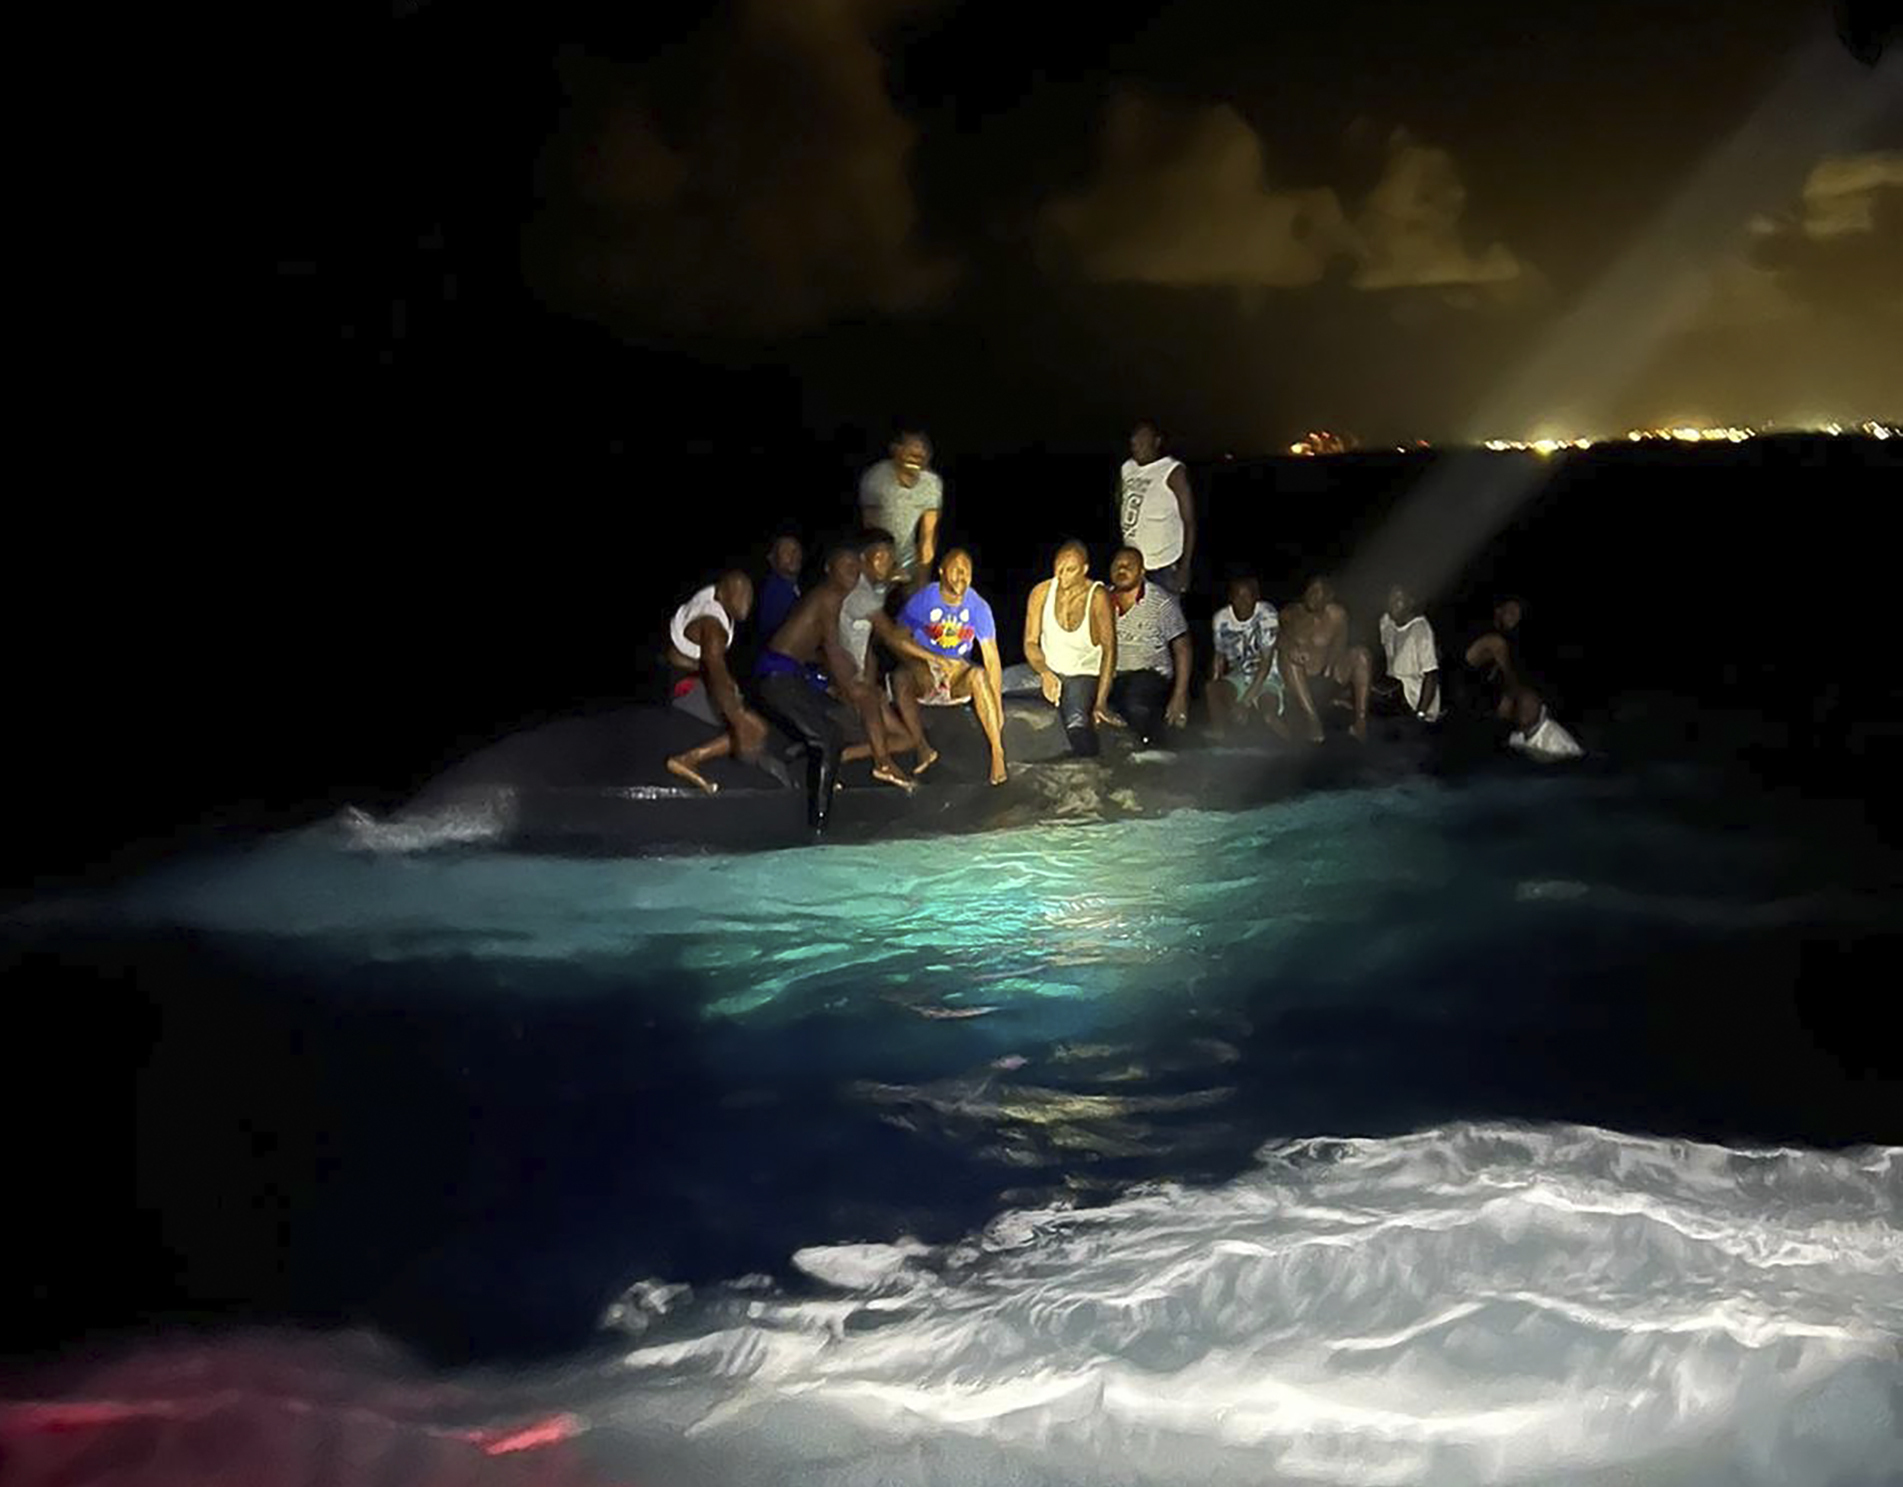 In this photo provided by the Royal Bahamas Defense Force, survivors sit on a capsized boat as they are about to be rescued near New Providence in the Bahamas, early Sunday, July 24, 2022. Bahamas Prime Minister Philip Brave Davis said in a statement that the dead included 15 women, one man and an infant. (Royal Bahamas Defense Force via AP)